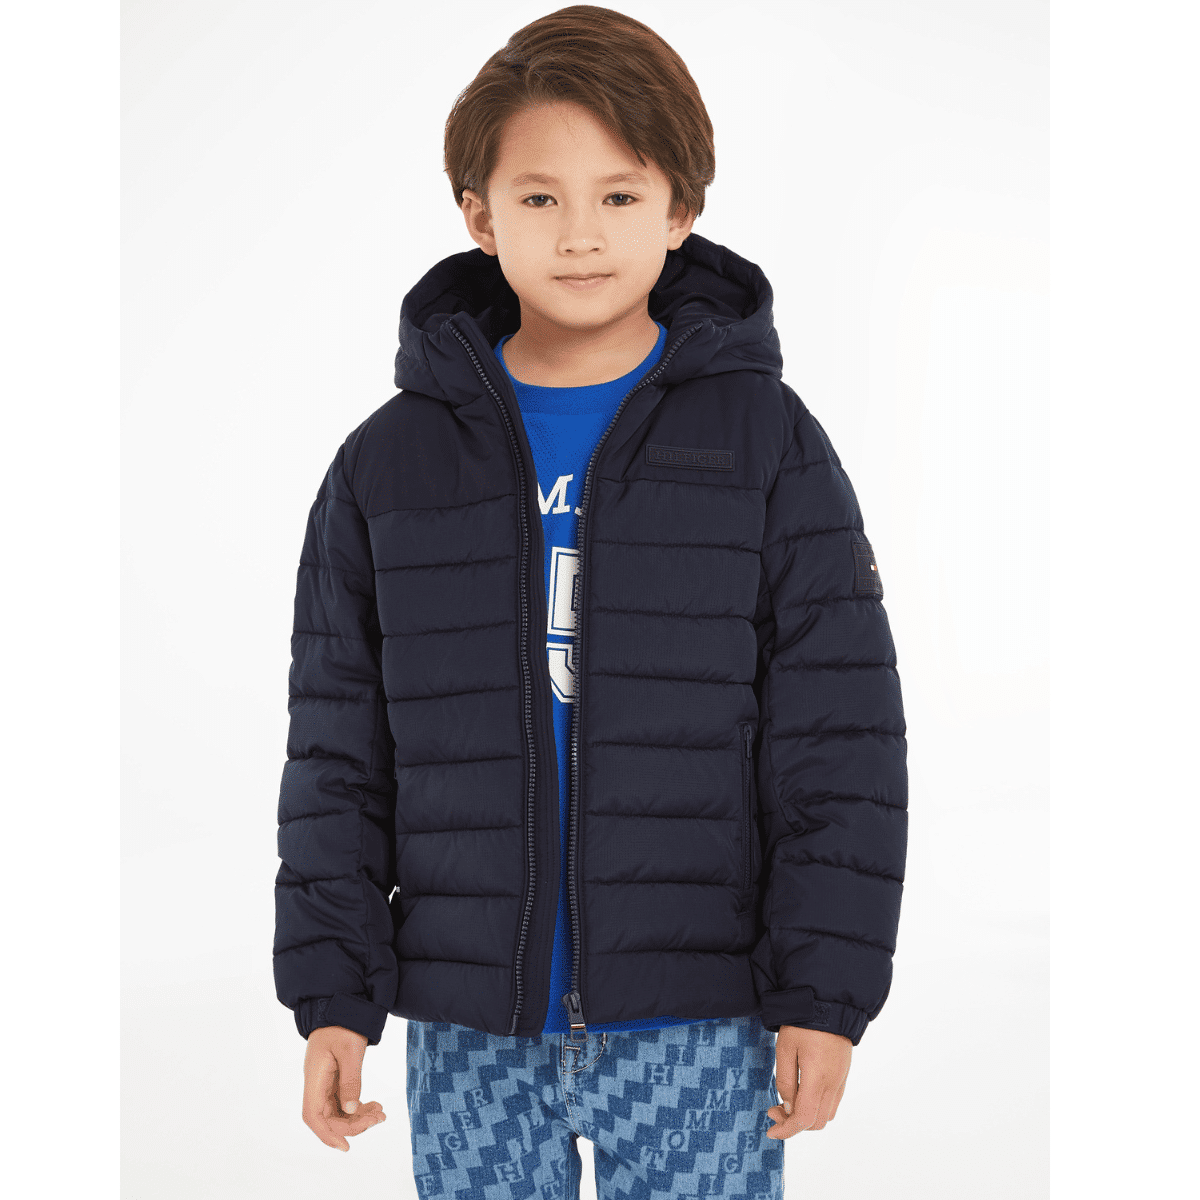 Tommy hilfiger boys new york black hooded jacket on model front view